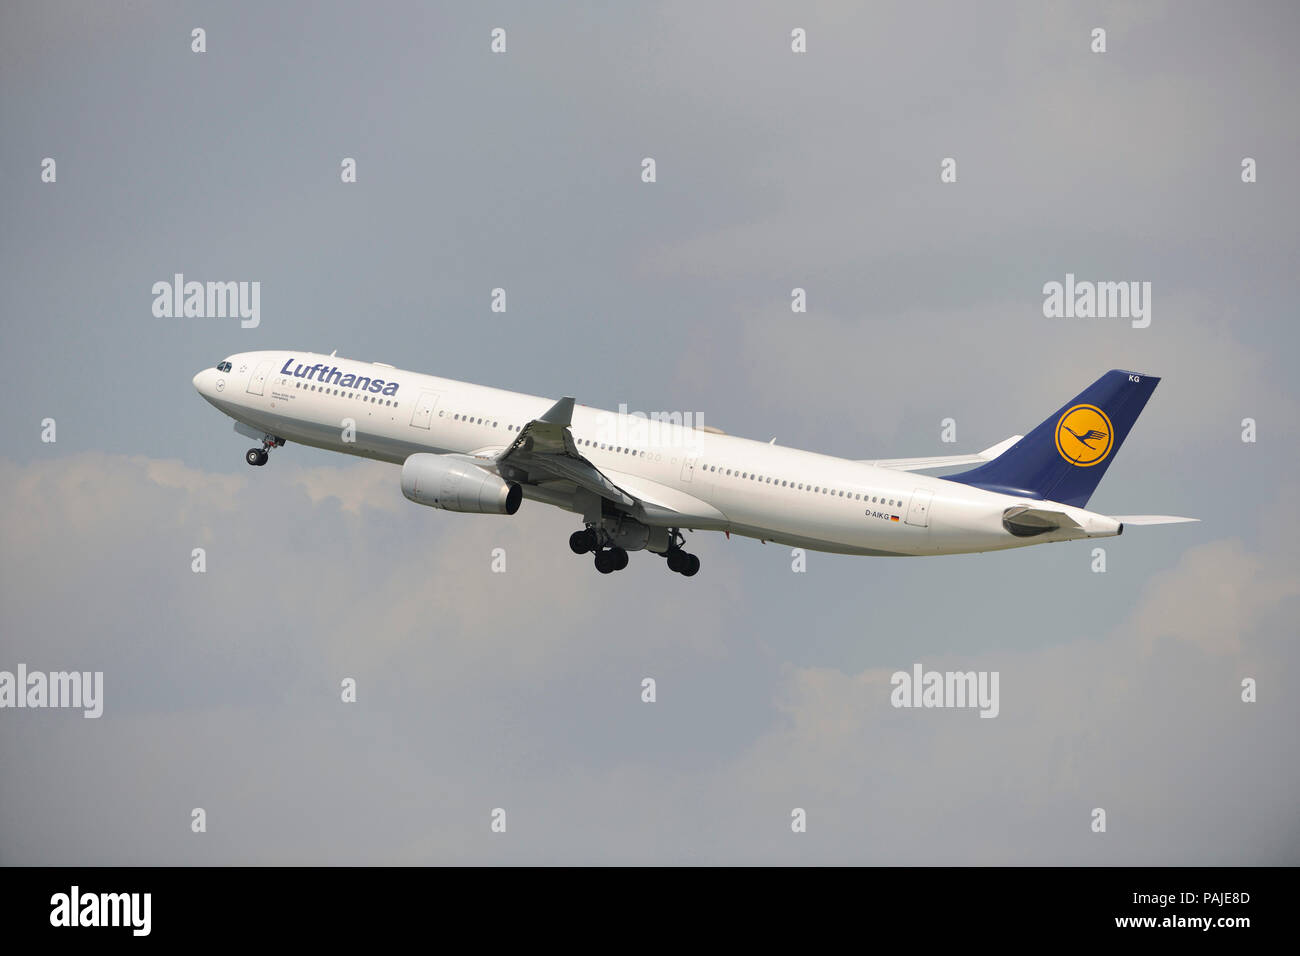 Lufthansa Airbus A330-300 climbing out after take-off with undercarriage retracting Stock Photo